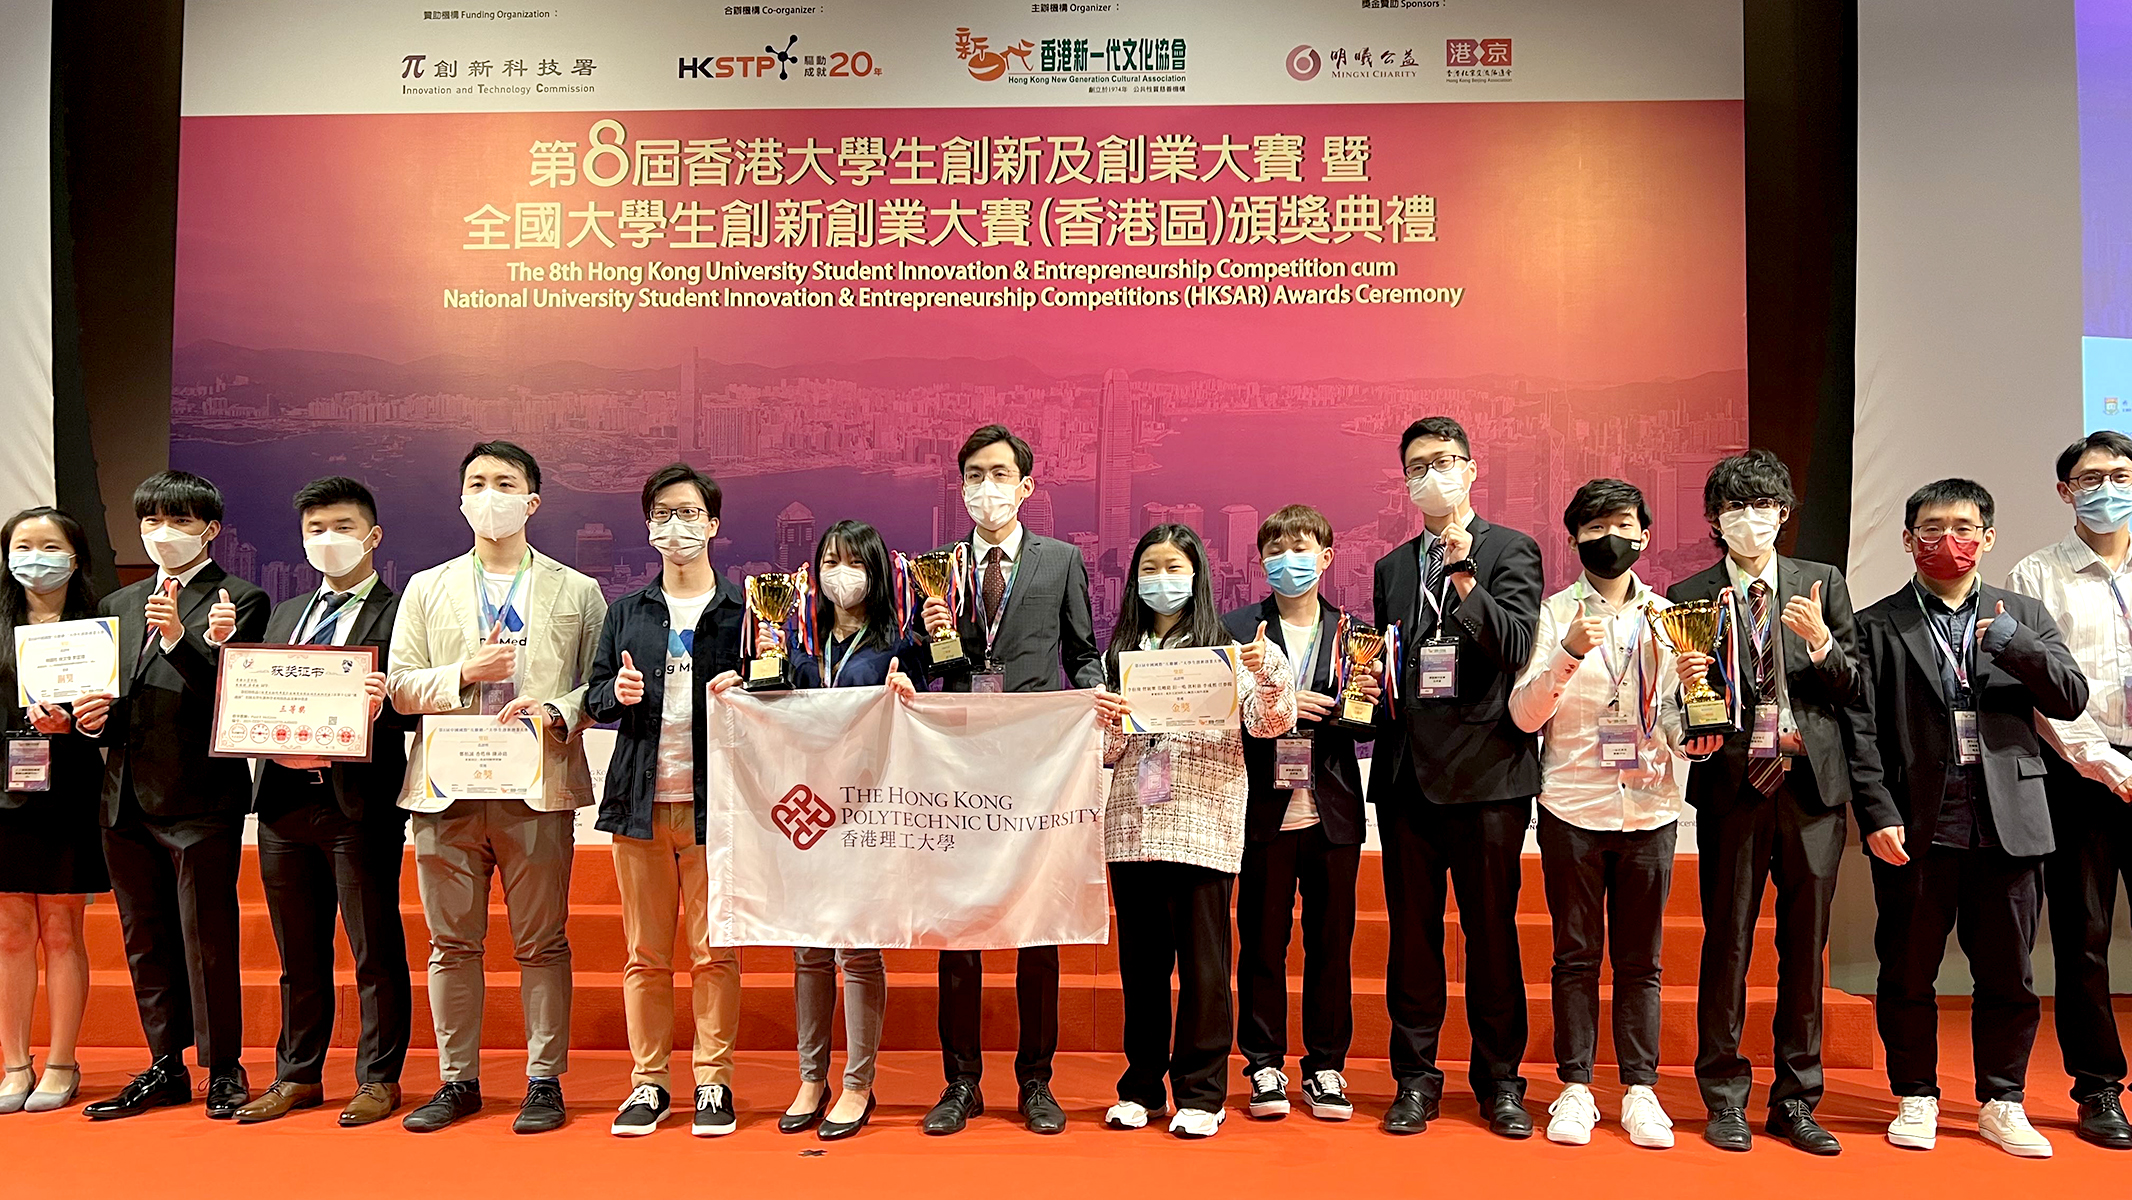 The project team also won the Gold Award of the 8th China International College Students’ “Internet+” Innovation and Entrepreneurship Competition.